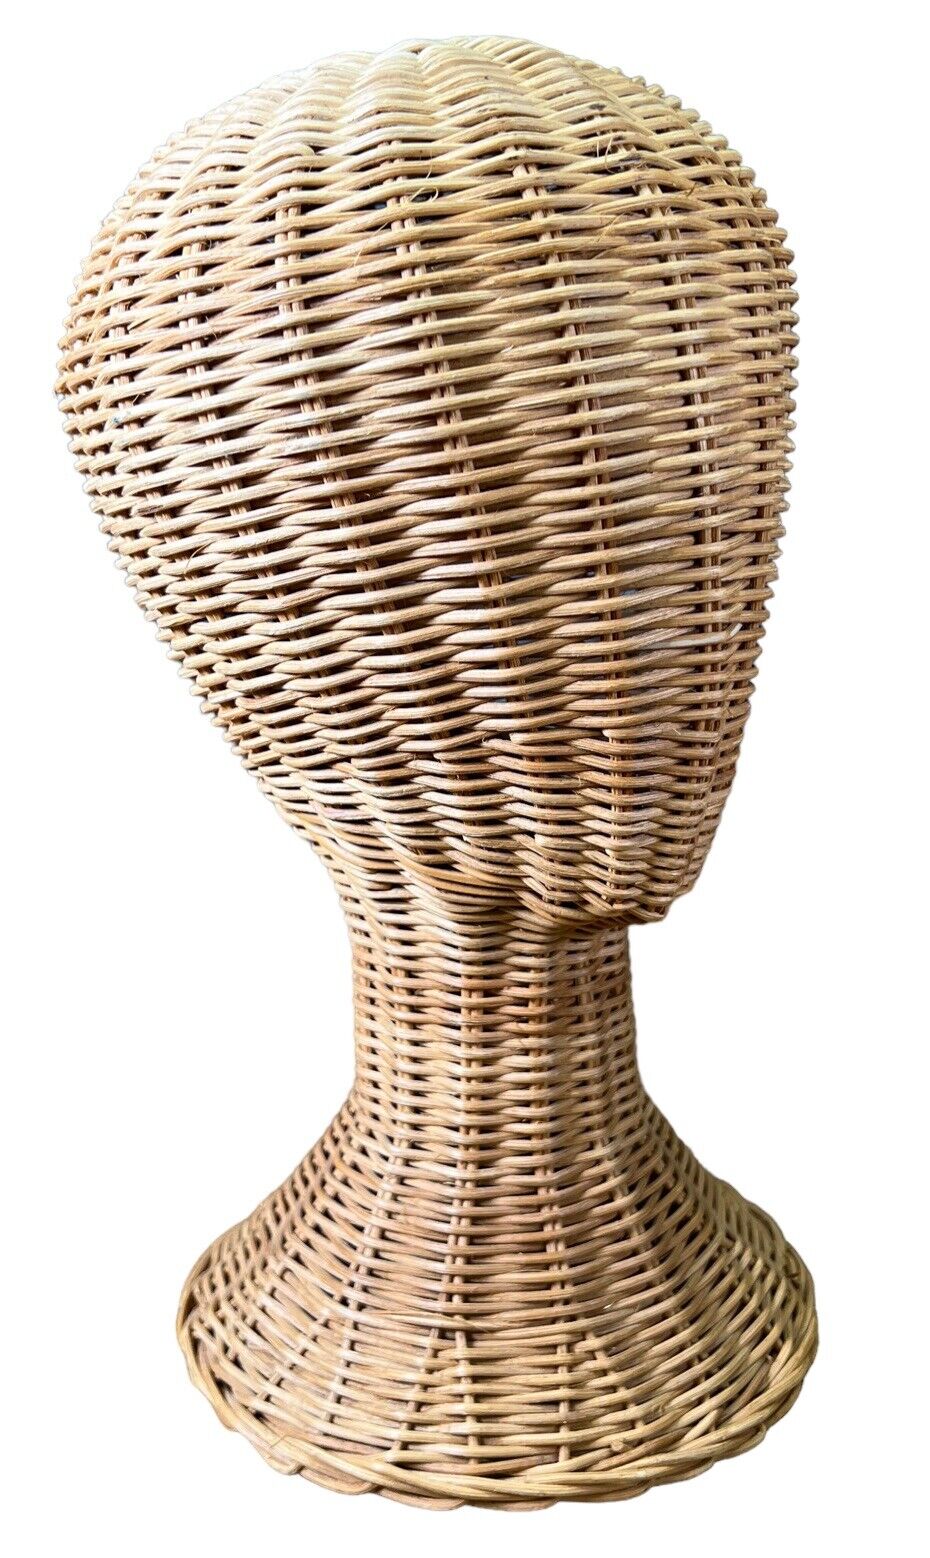 Vintage hand made wicker mannequin hat head 13 inches tall